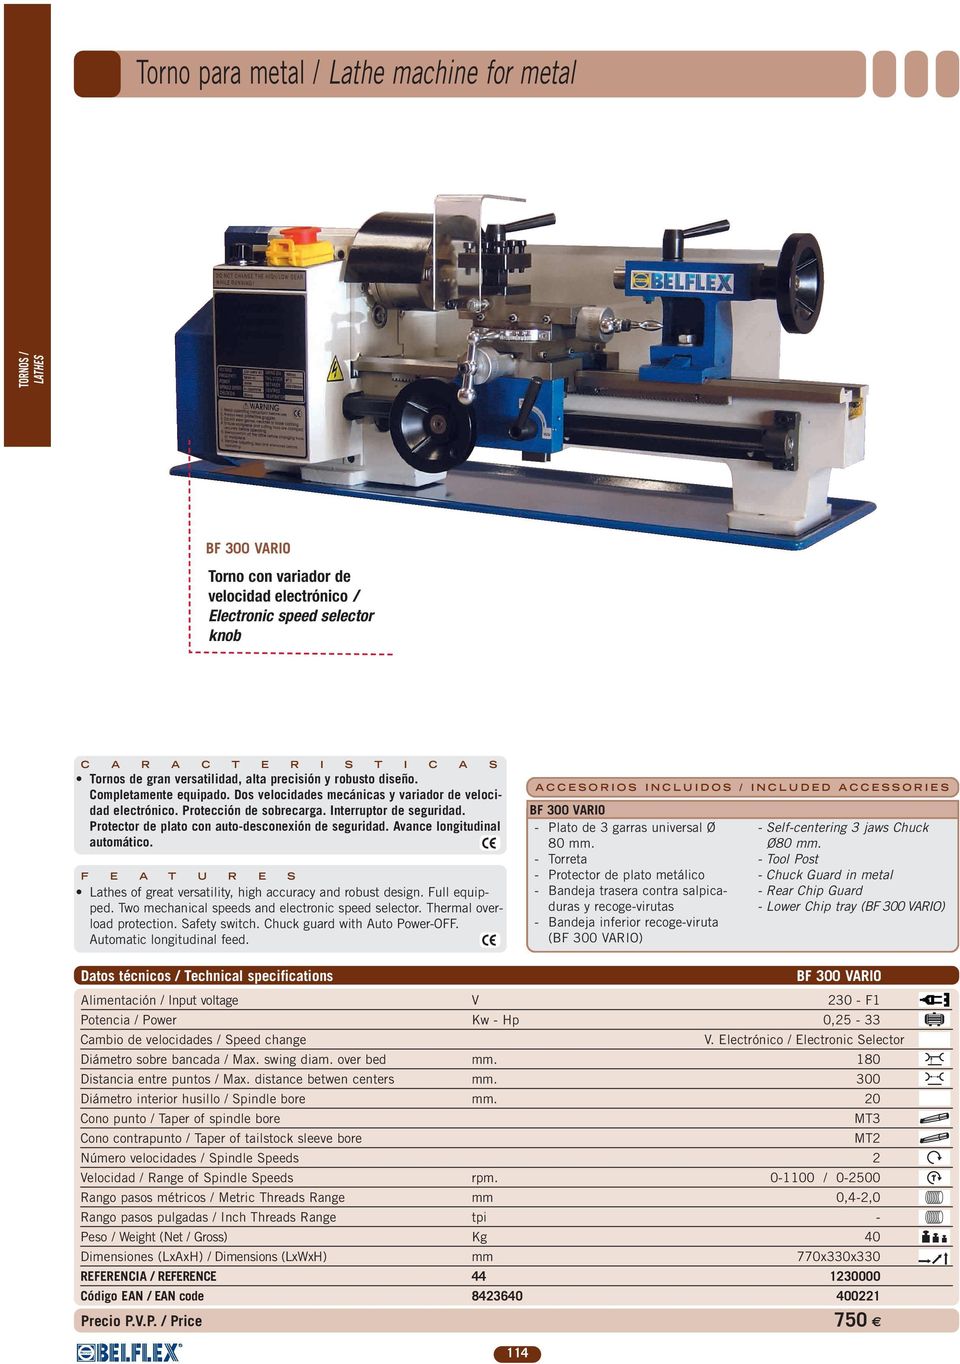 Avance longitudinal automático. Lathes of great versatility, high accuracy and robust design. Full equipped. Two mechanical speeds and electronic speed selector. Thermal overload protection.